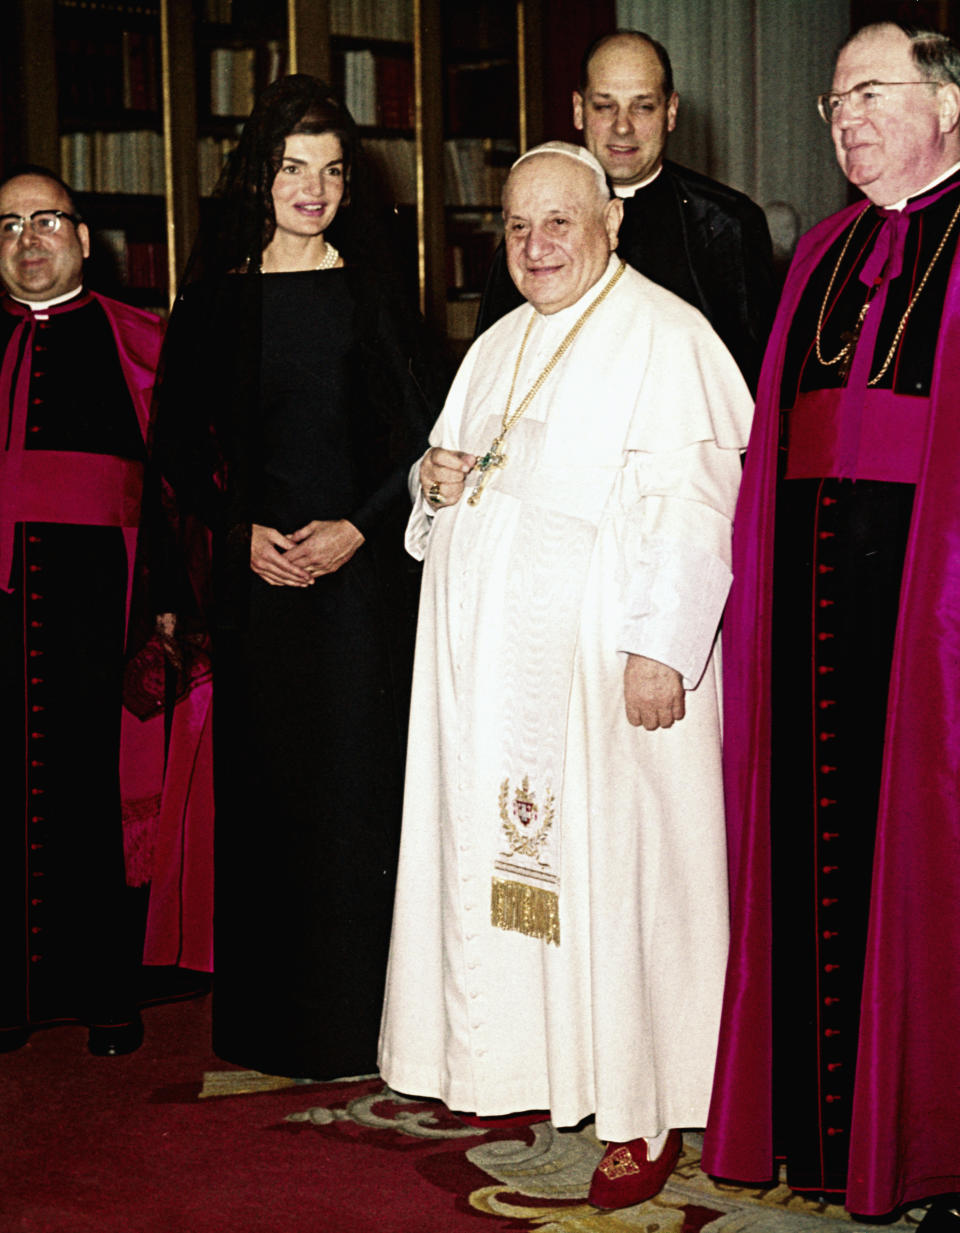 Gotta be royal! First lady Jackie Kennedy was Catholic, but exceptions&nbsp;don't apply to non-royals. She wore full-length black to meet&nbsp;Pope John XXIII in 1962.